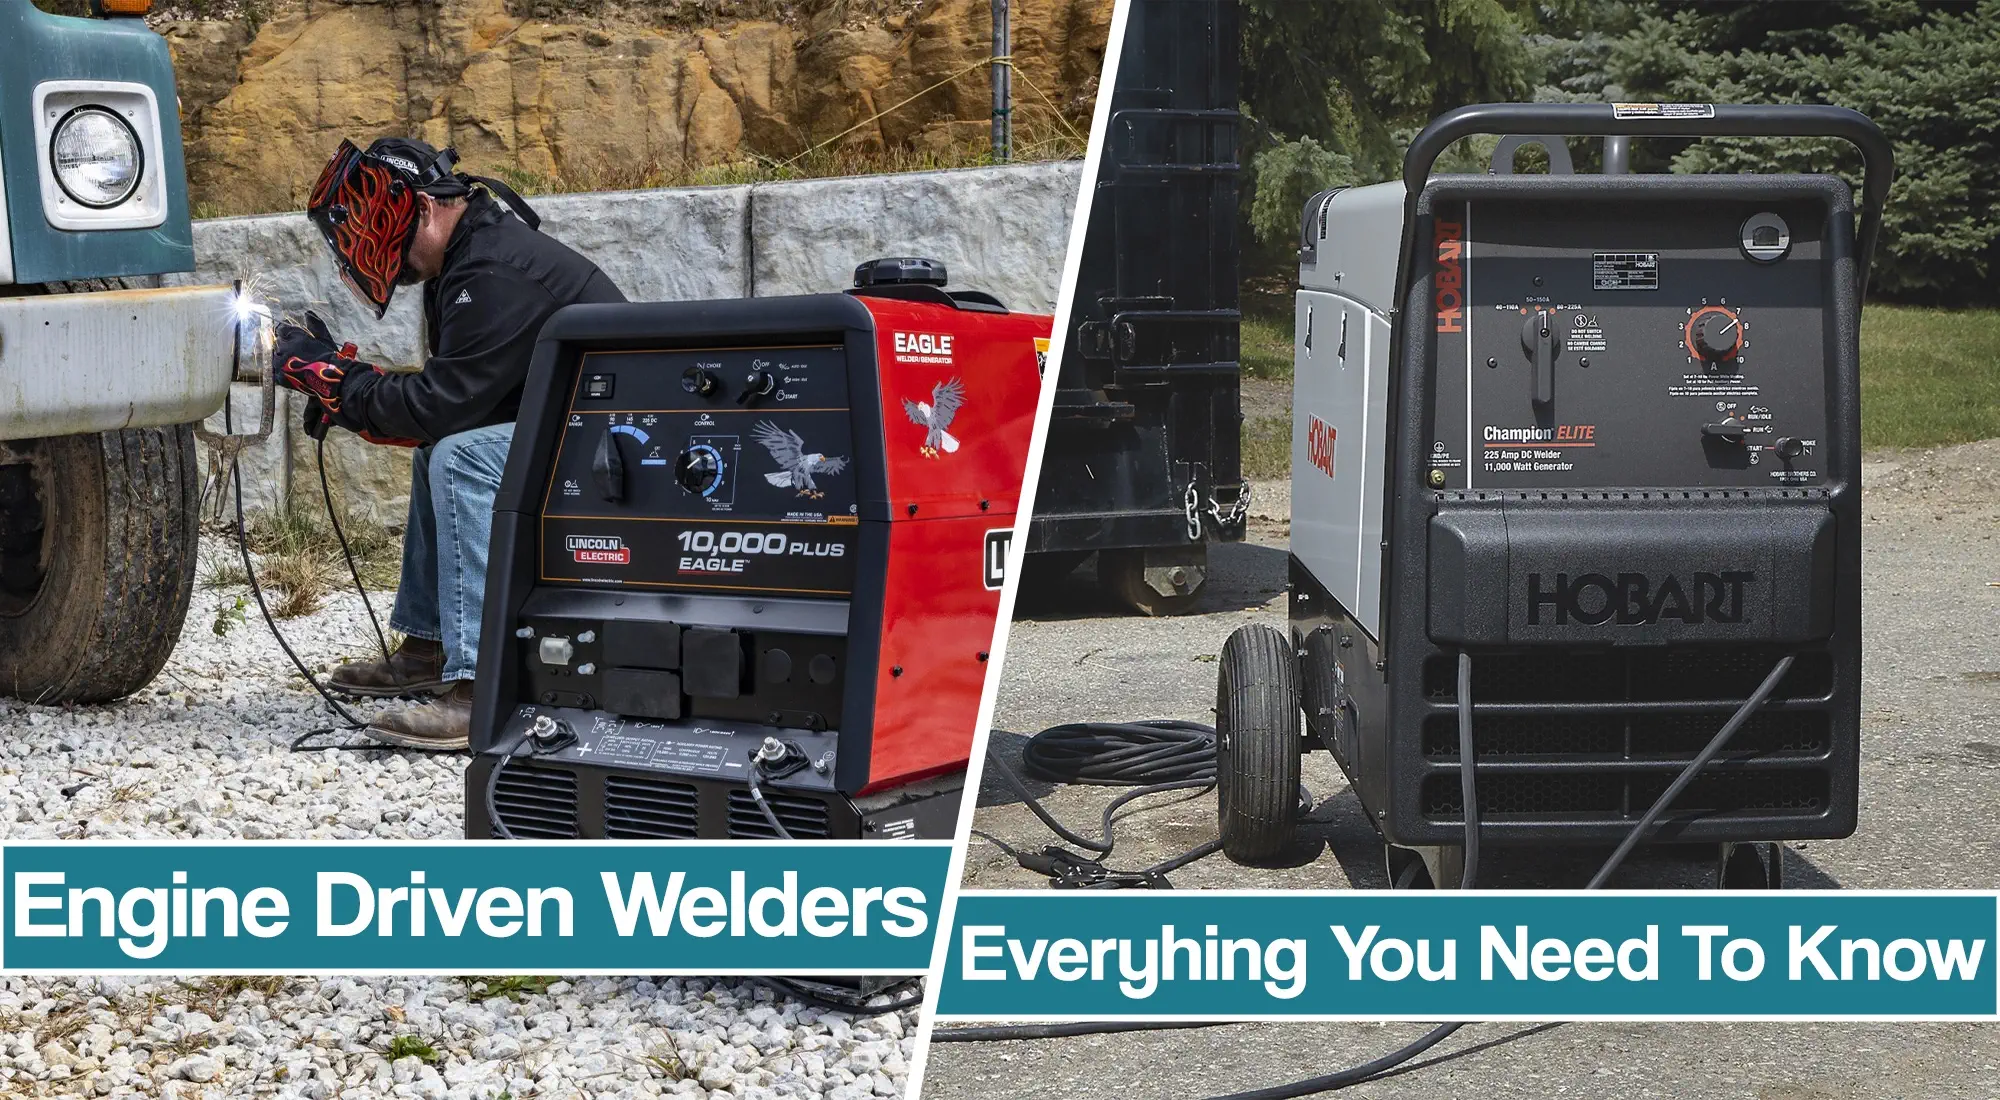 Engine Driven Welders – Everything You Need To Know